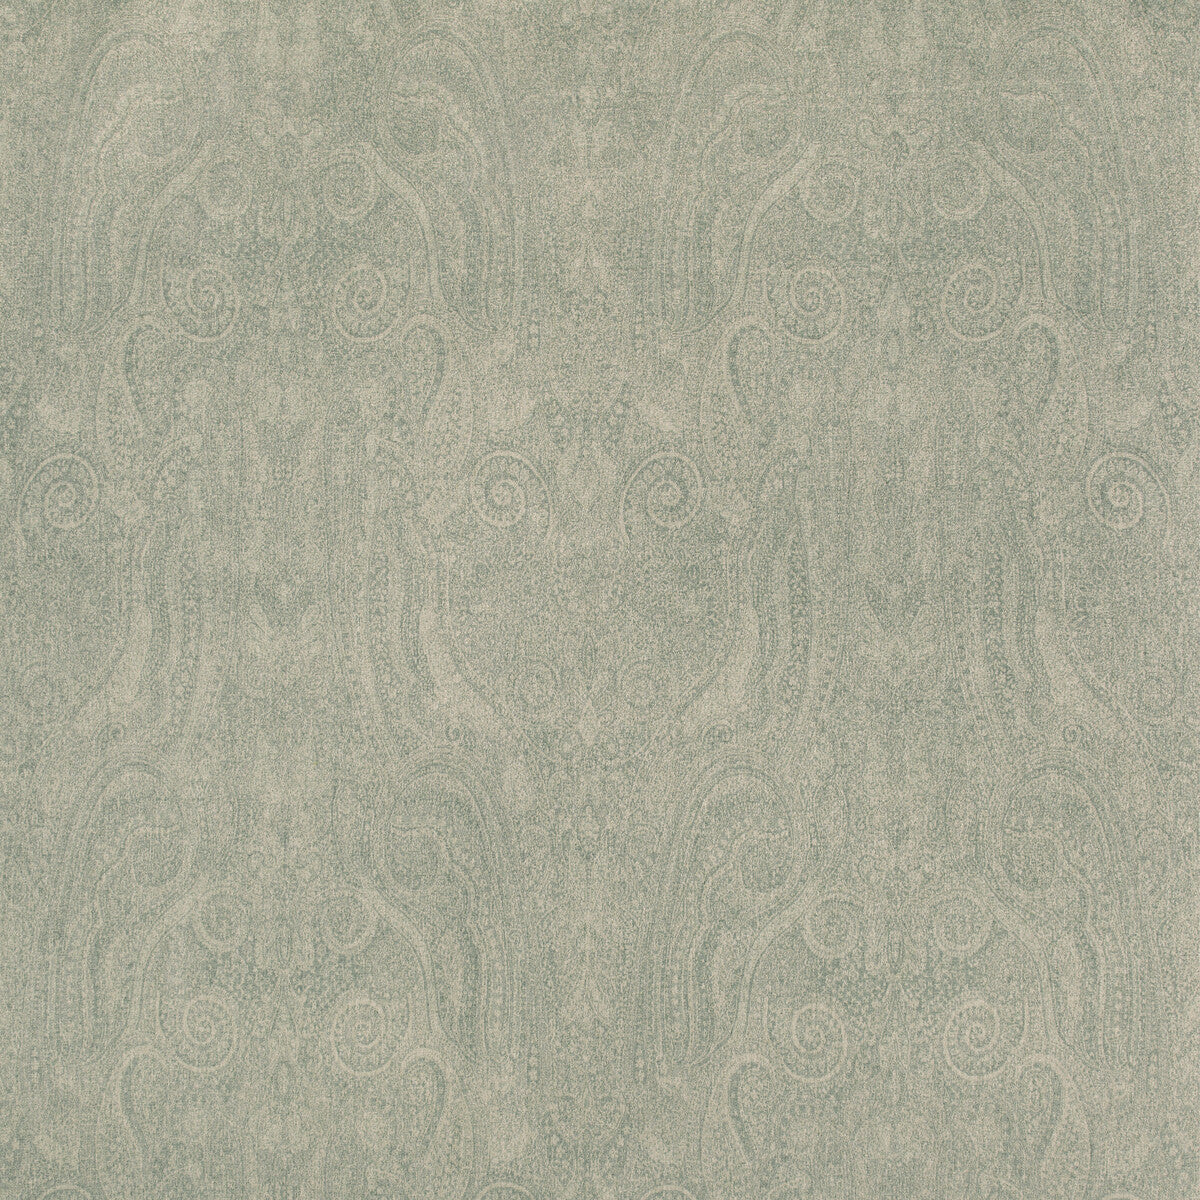 Foxhill Paisley fabric in aqua color - pattern 2019112.113.0 - by Lee Jofa in the Manor House collection